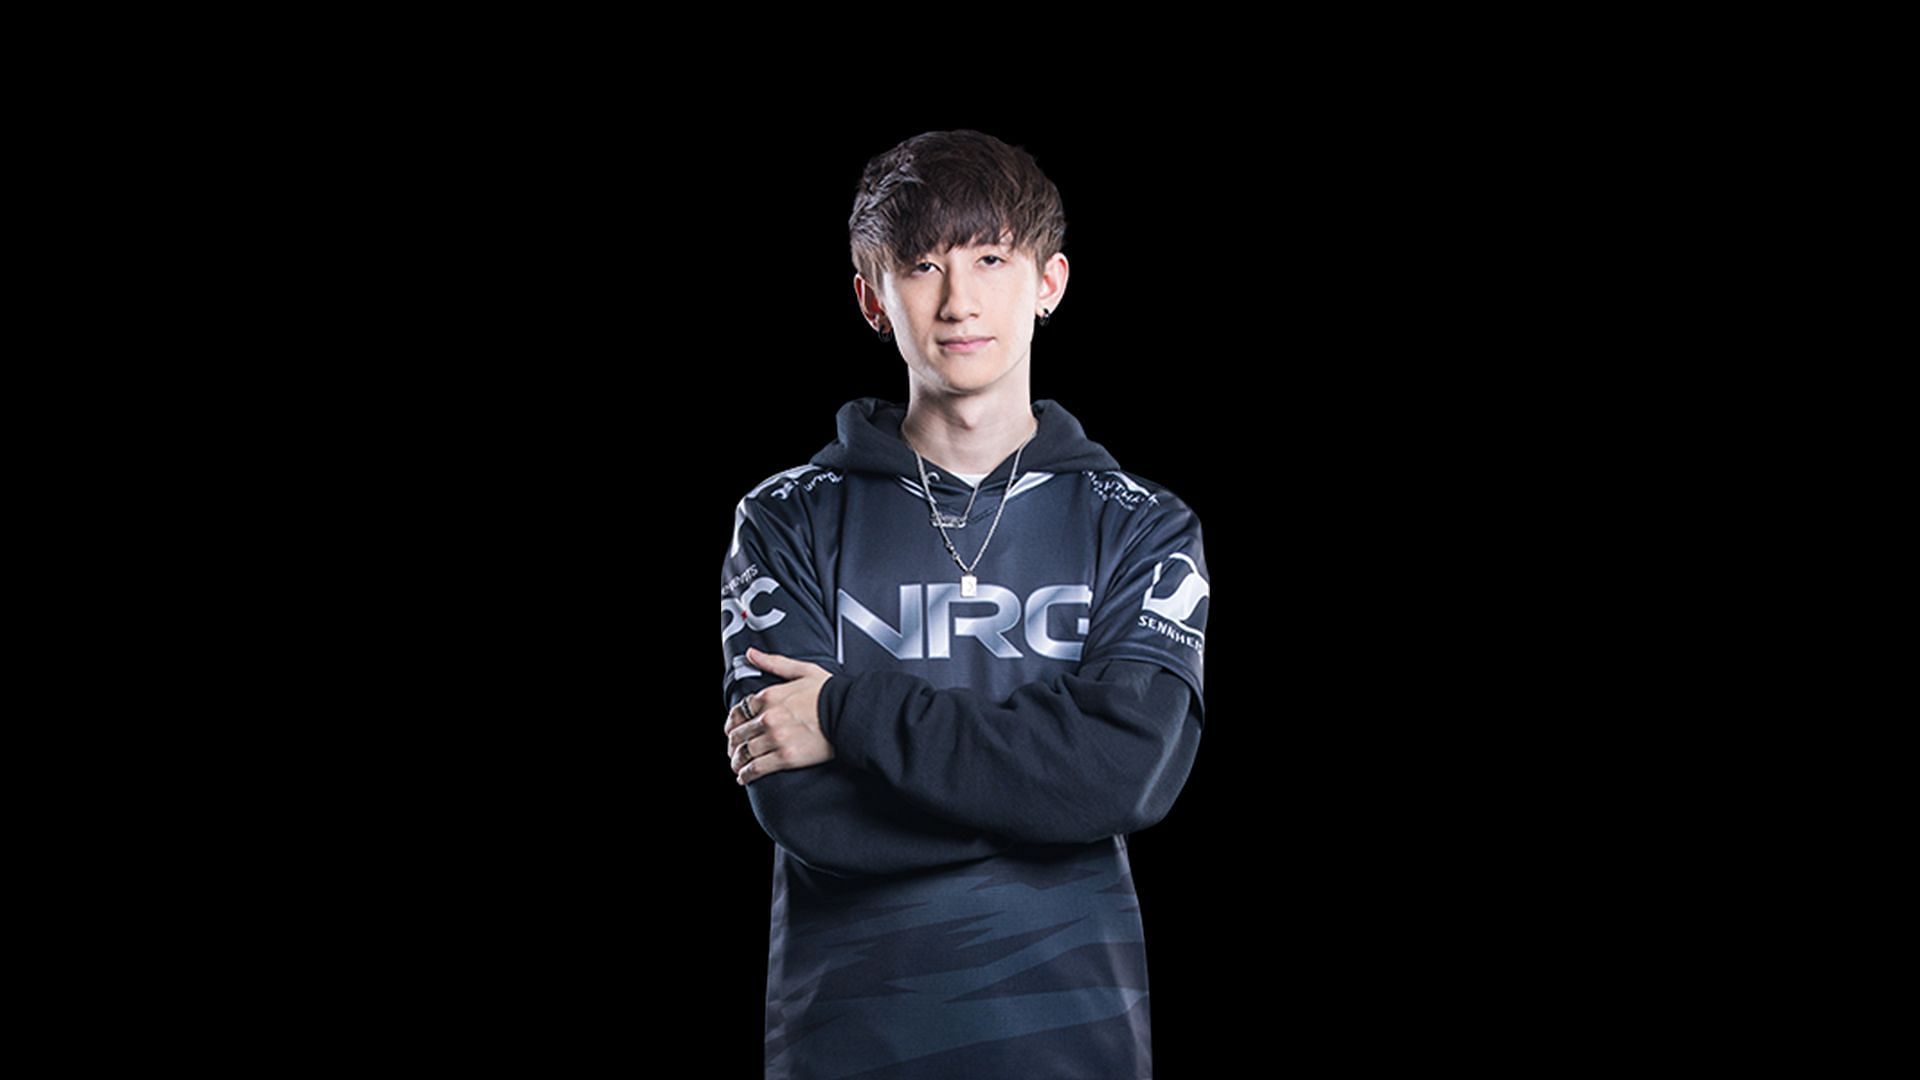 Aceu is one of the best movement players in Apex Legends (Image via Liquipedia)